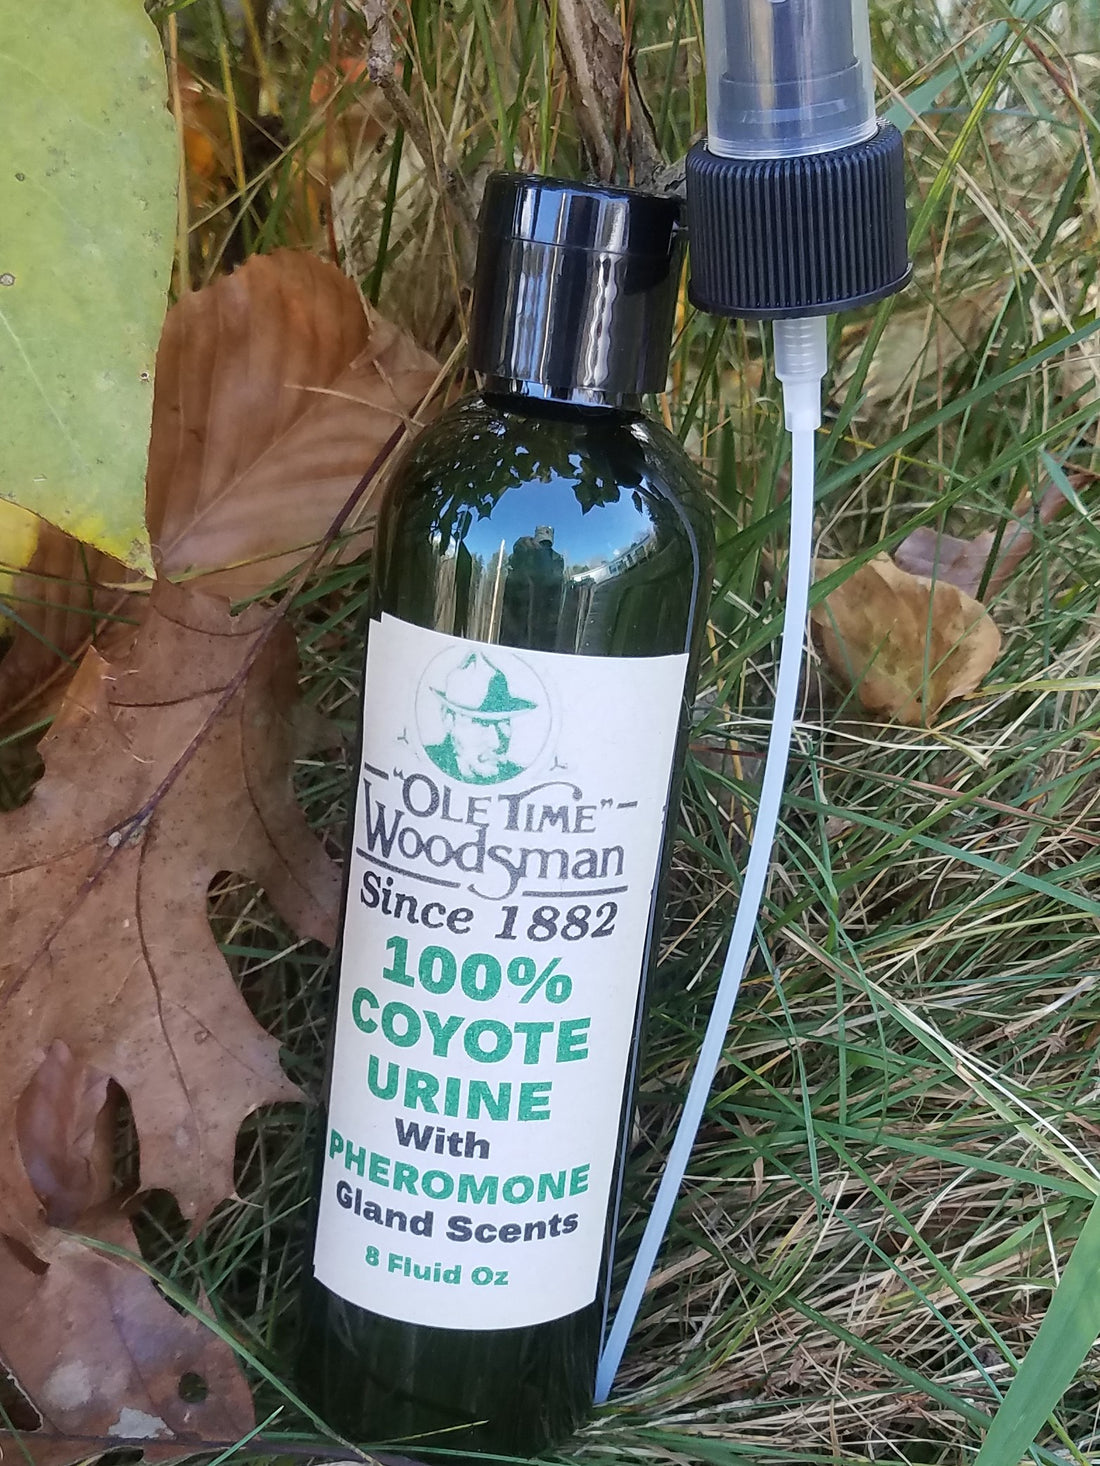 What is coyote urine good for?